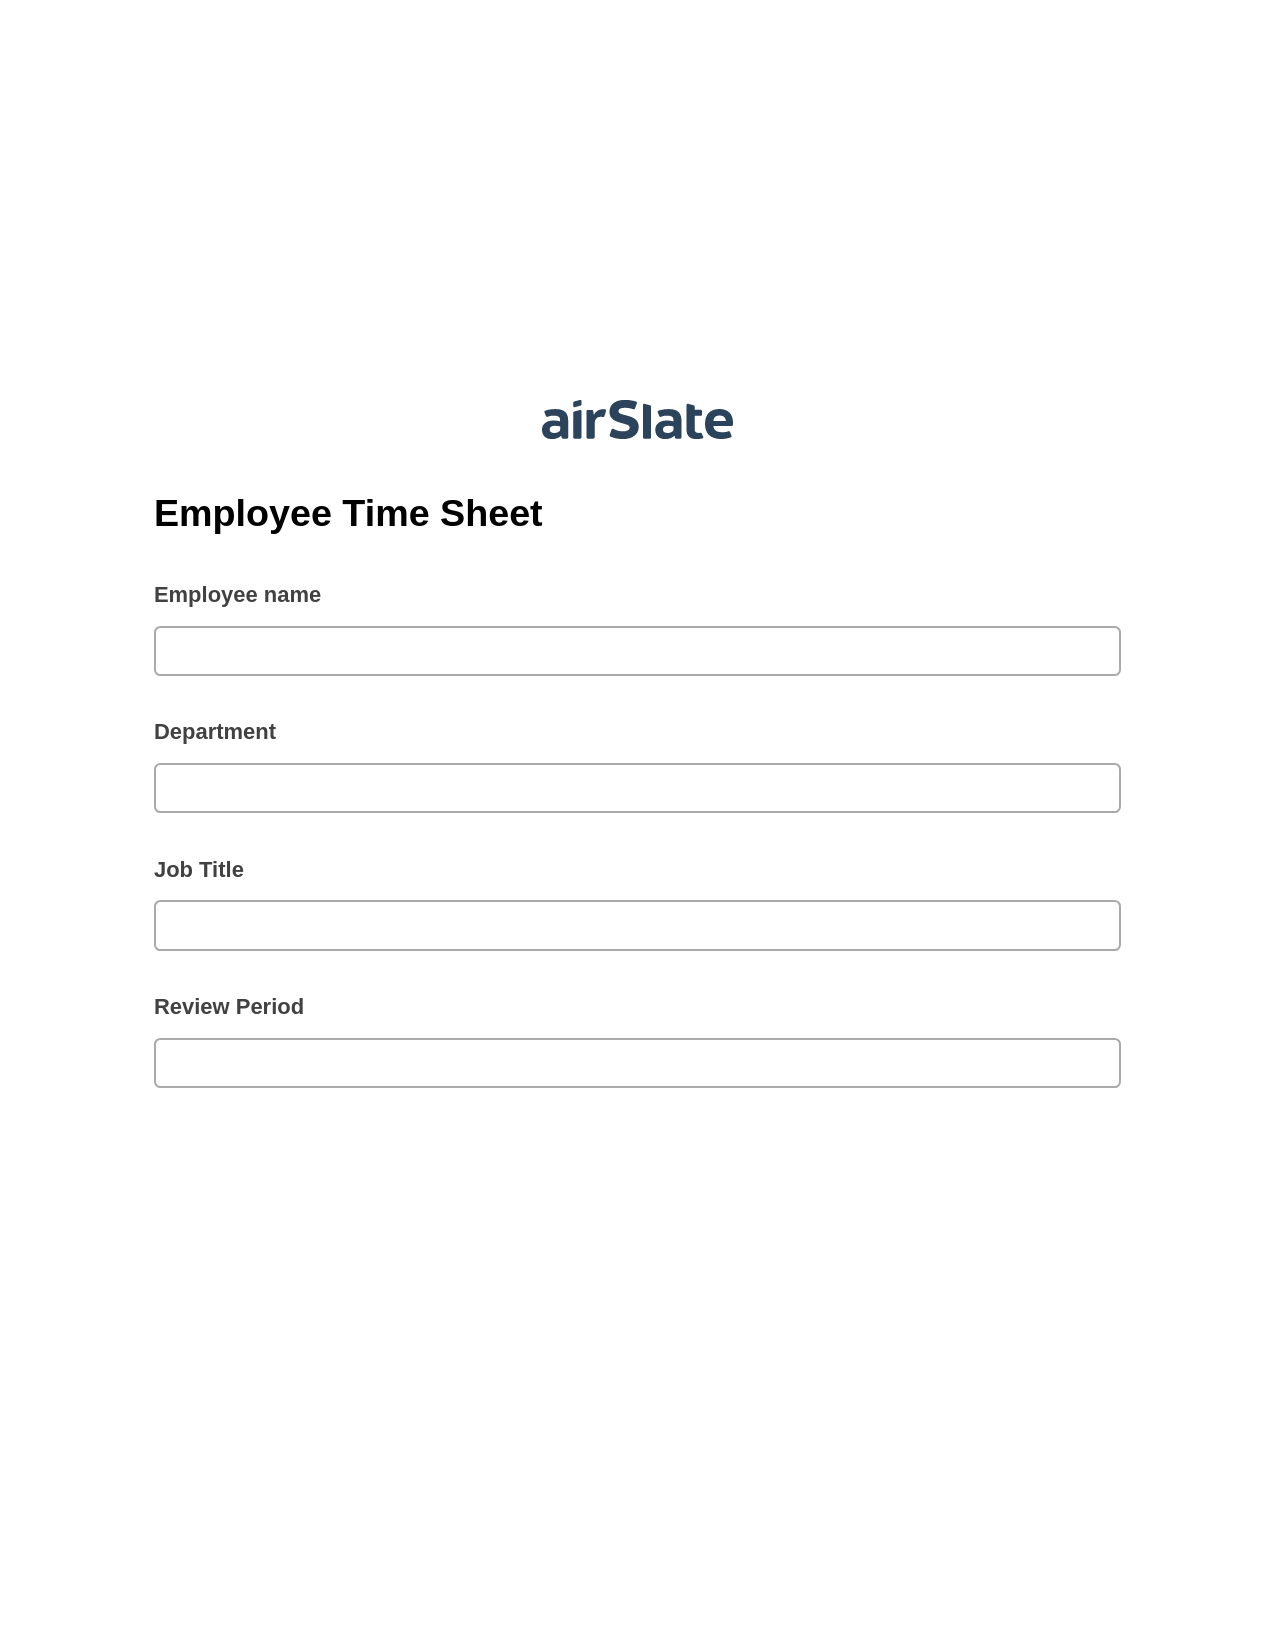 Multirole Employee Time Sheet Prefill from NetSuite records, Create slate addon, Archive to Box Bot